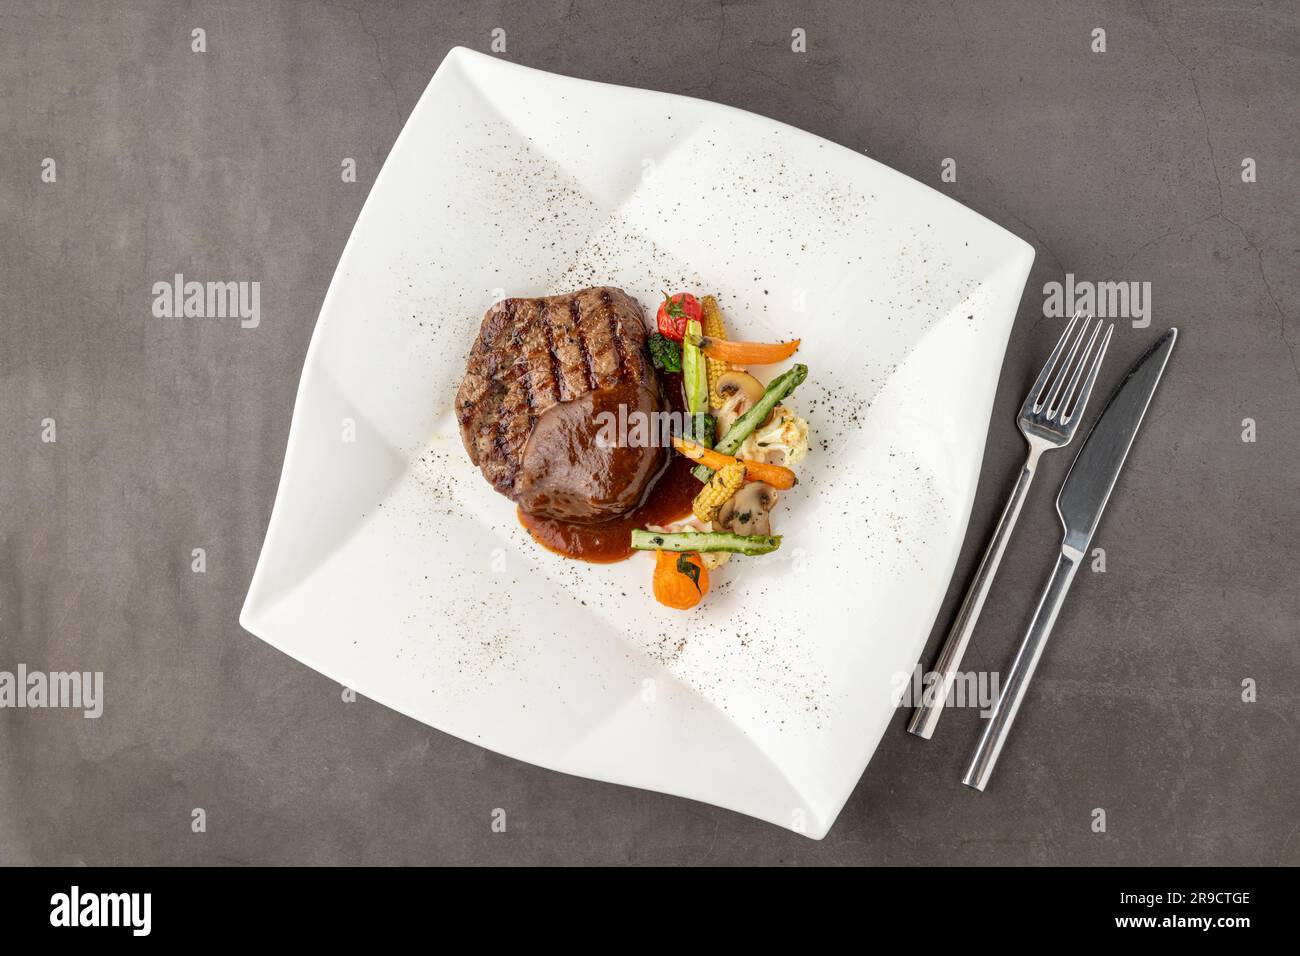 Grilled beef tenderloin with Demi glace sauce with grilled vegetables on a white porcelain plate Stock Photo